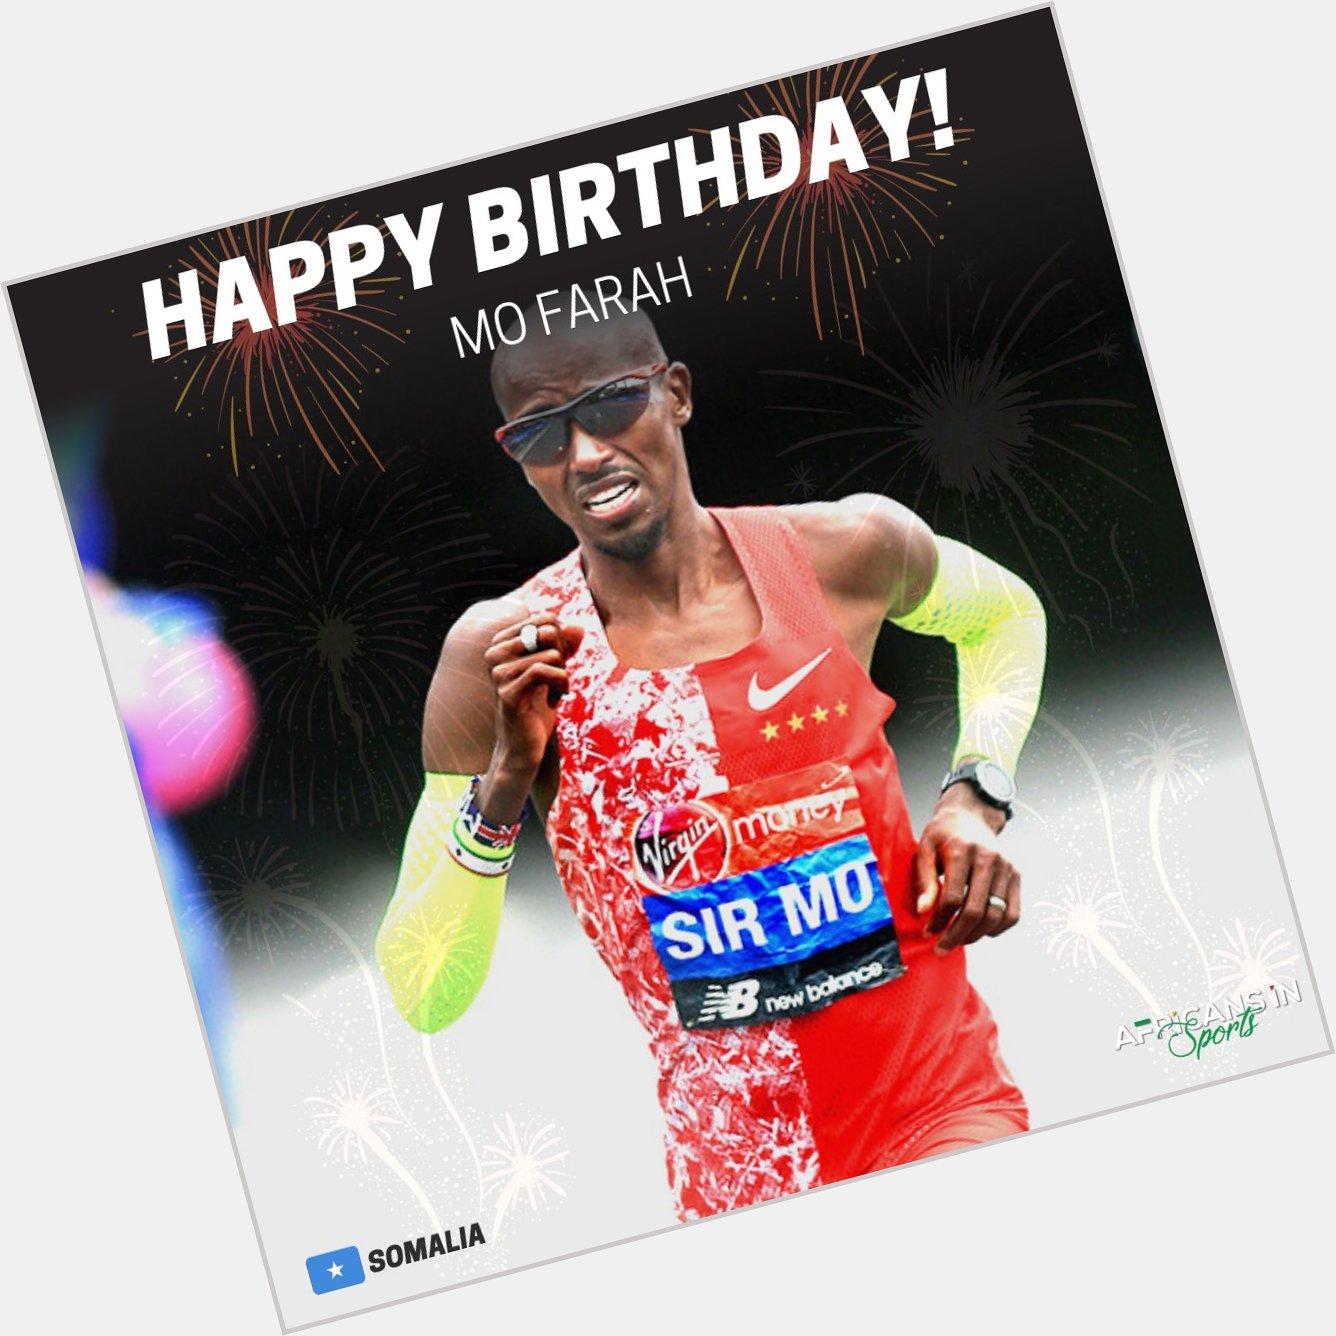 Happy Birthday to Professional athlete, Mo Farah  - Send him love via the comment section 